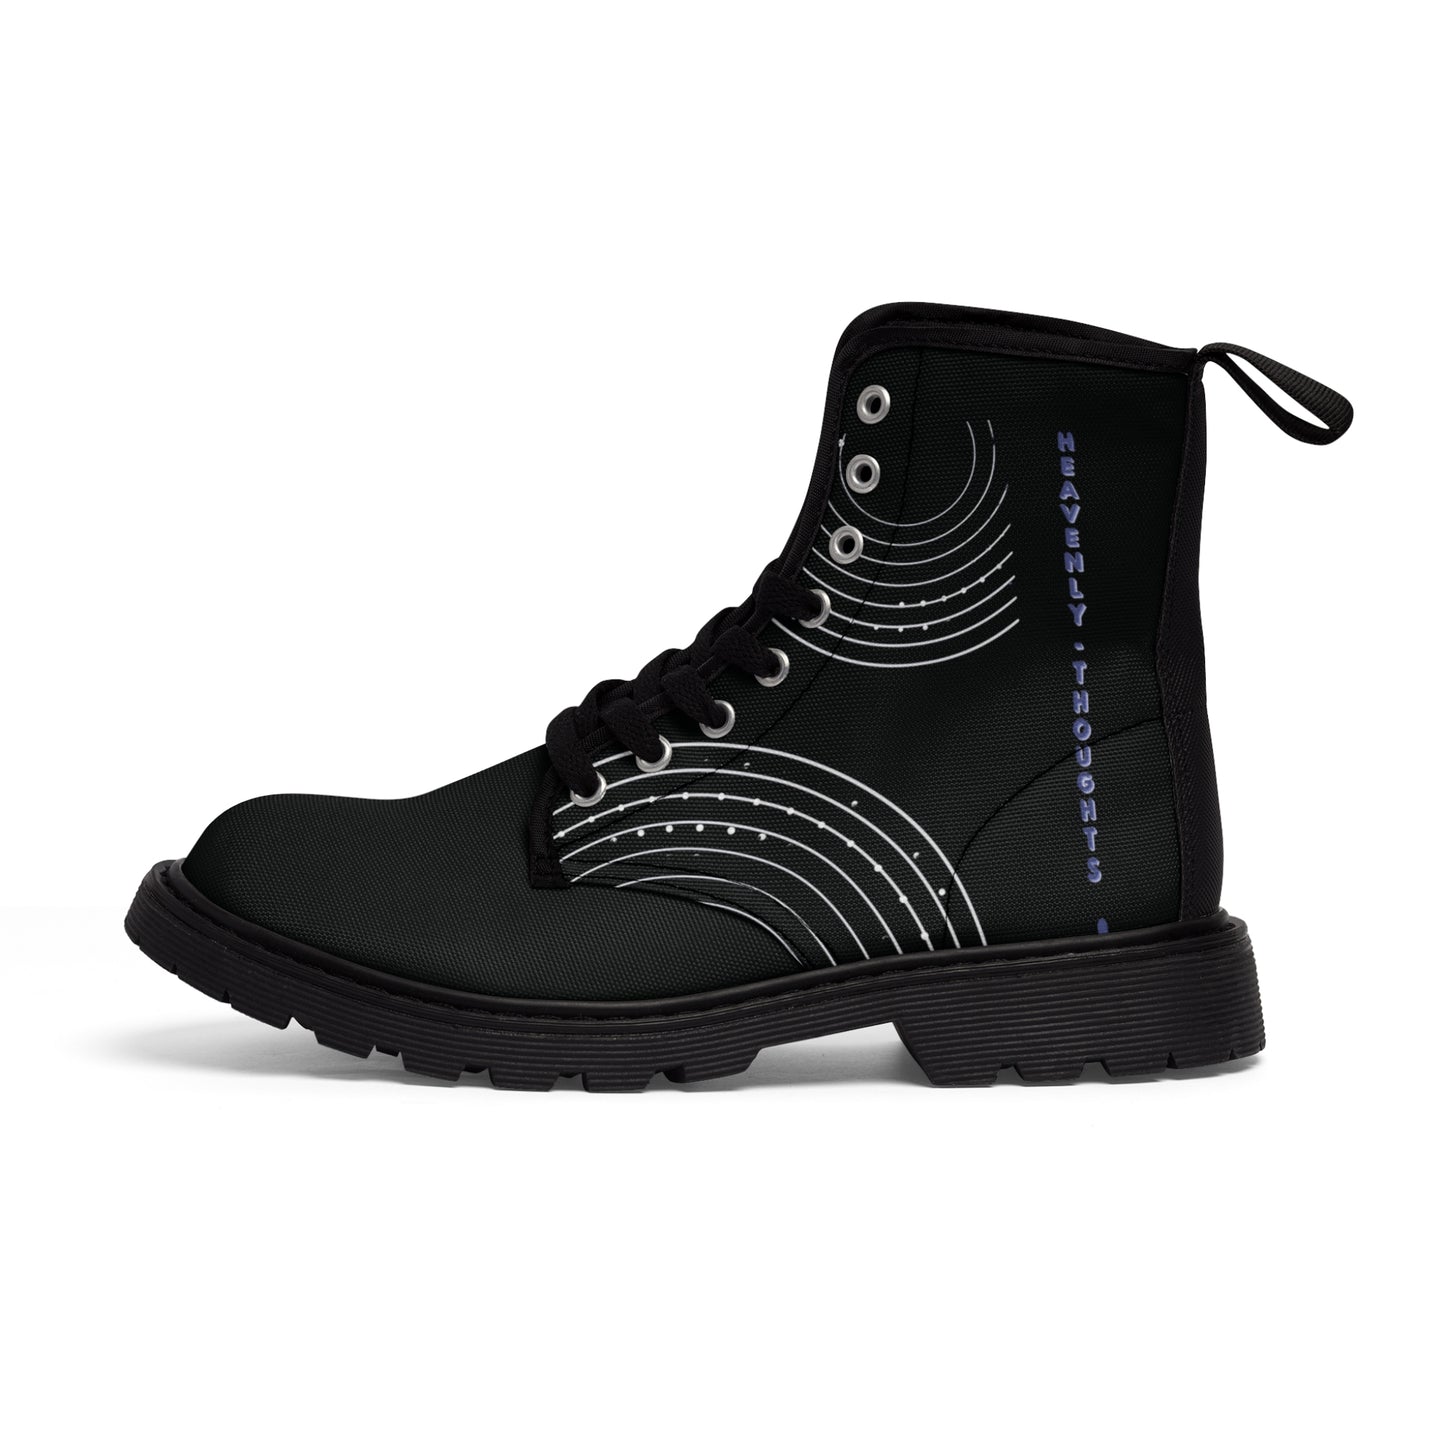 Heavenly Thoughts Men's Canvas Boots